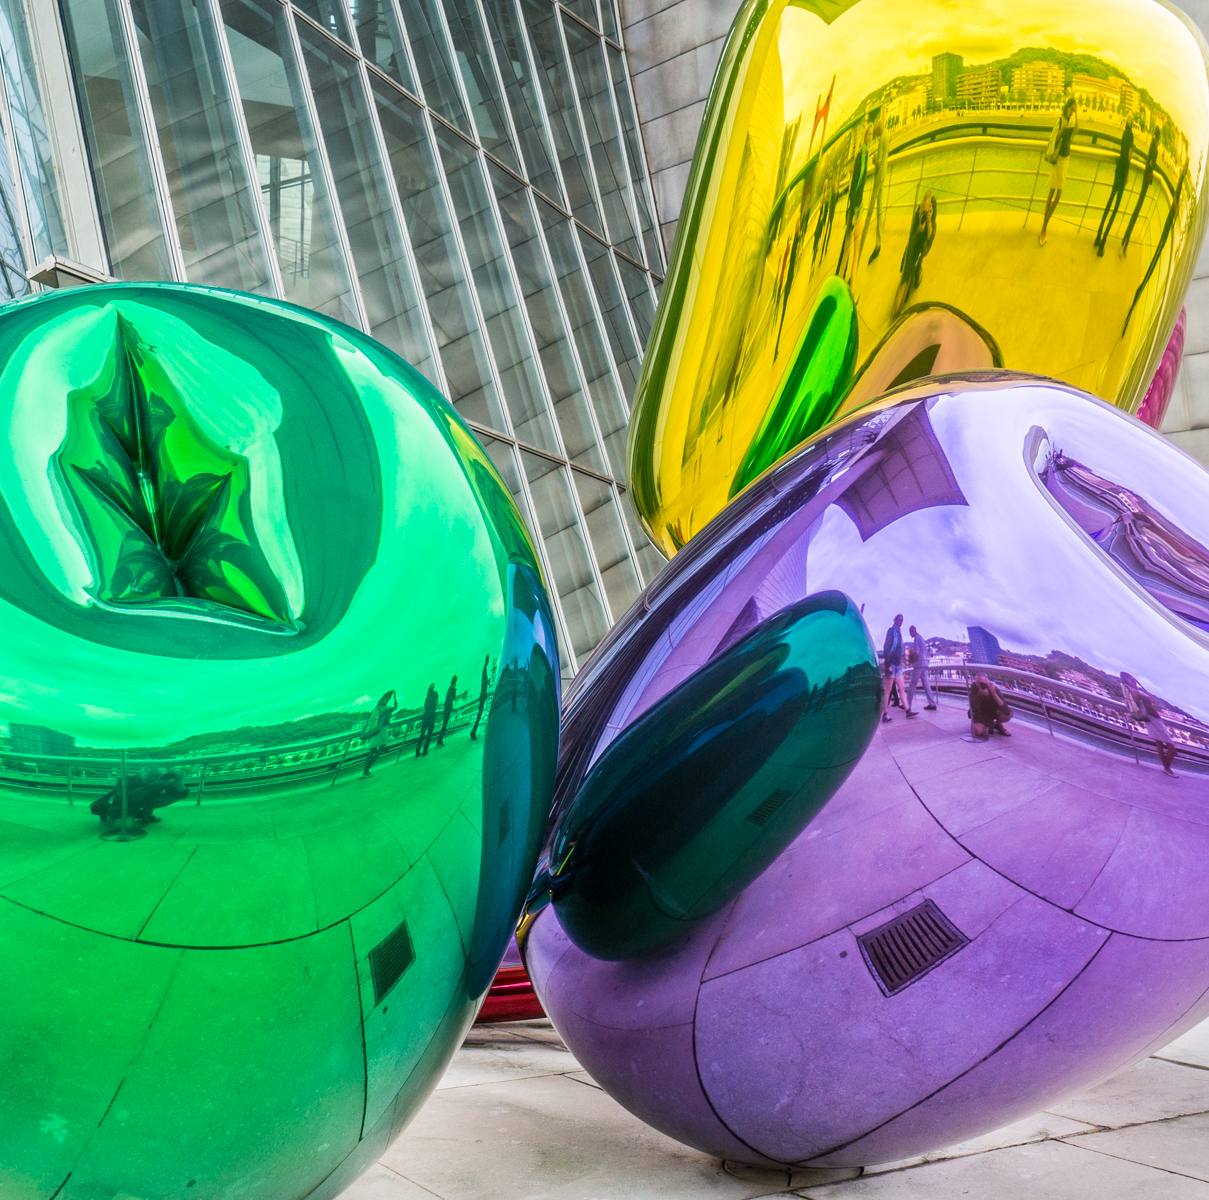 The Tulips sculpture by American artist Jeff Koons adjacent to the Guggenheim Museum Bilbao | Photo by Mike Hudak